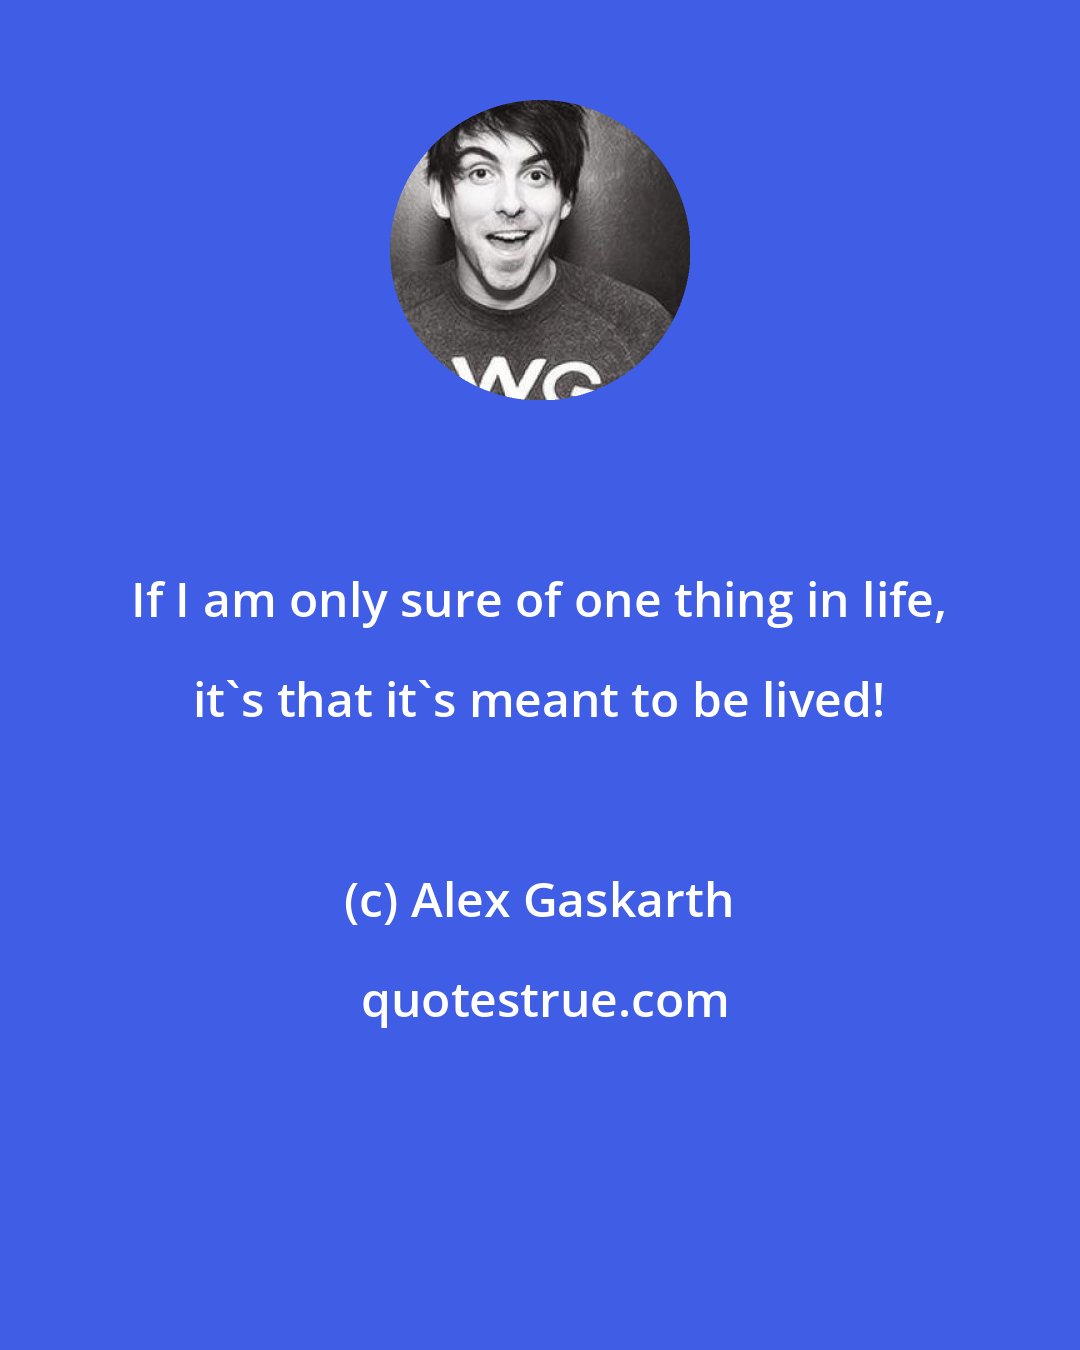 Alex Gaskarth: If I am only sure of one thing in life, it's that it's meant to be lived!